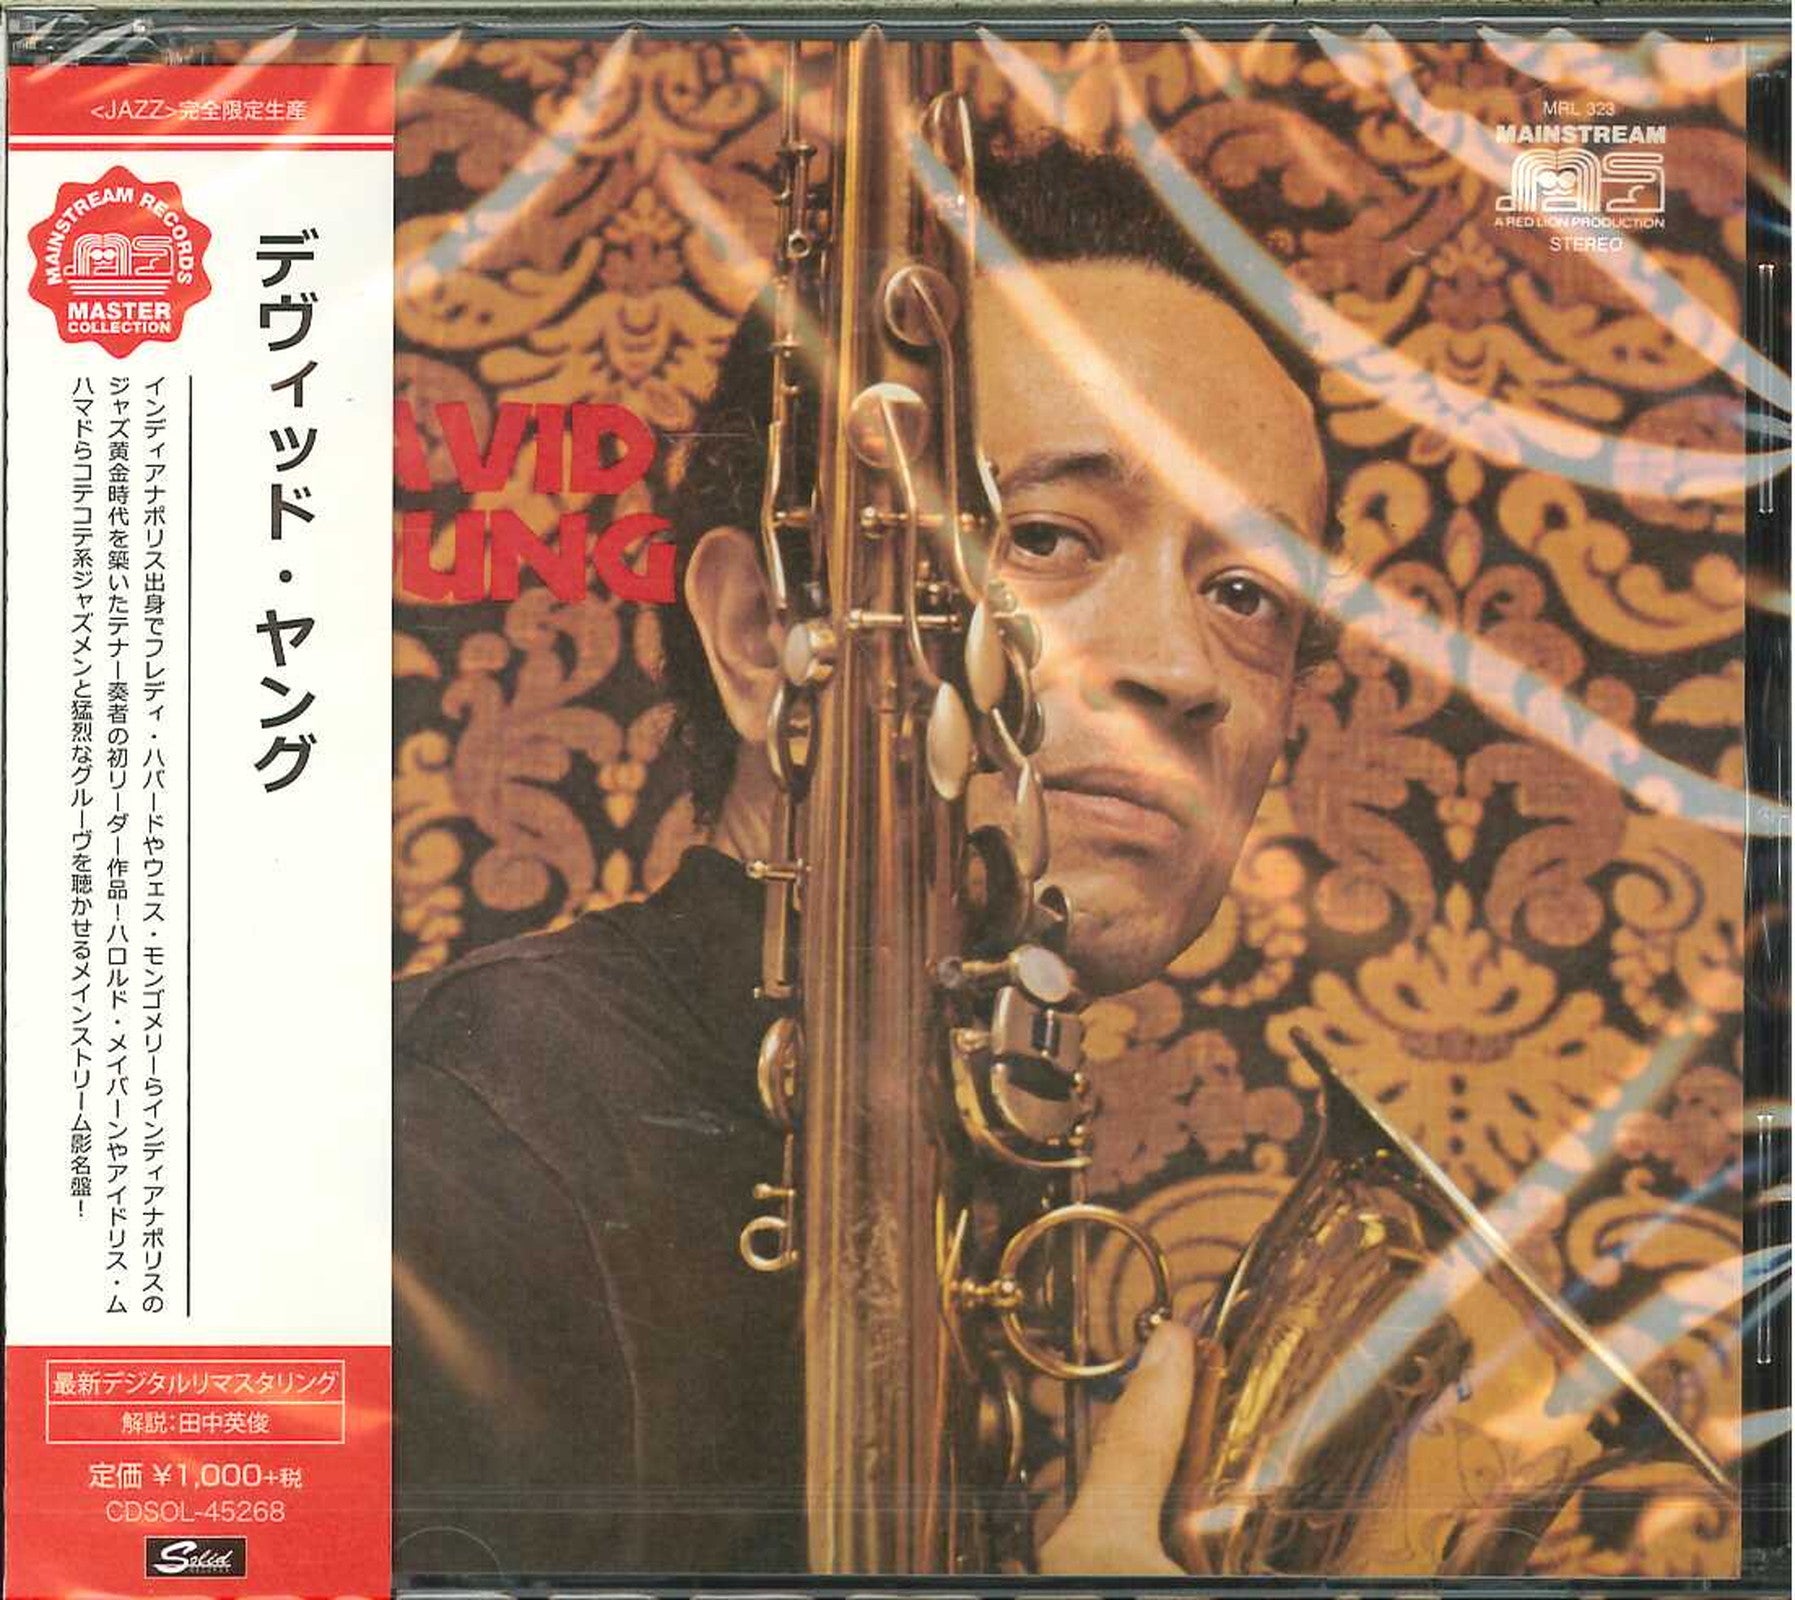 David Young - S/T - Japan CD Limited Edition – CDs Vinyl Japan 